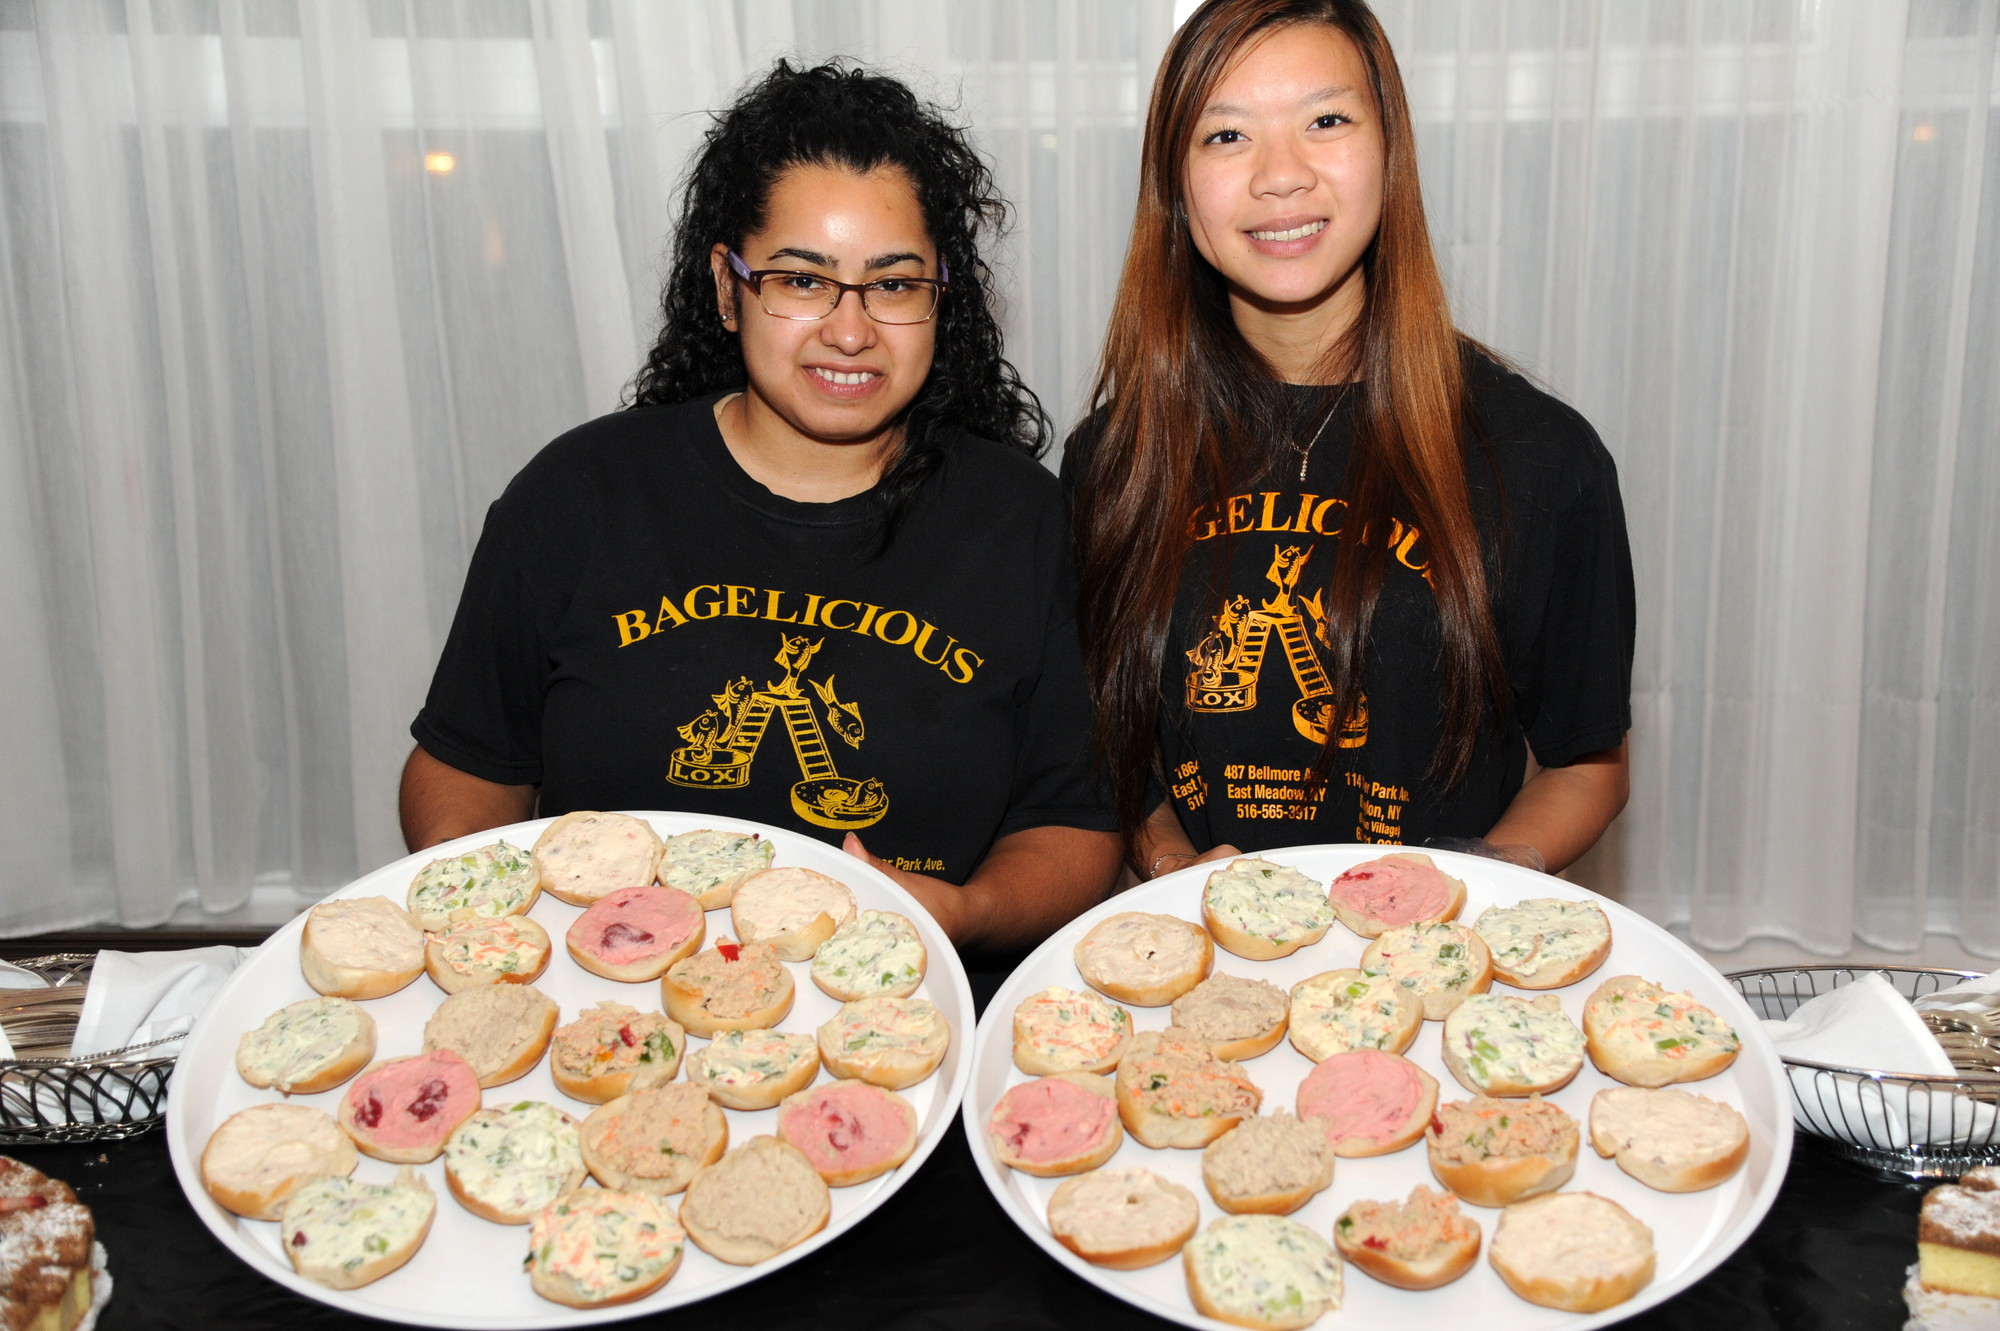 Casandra Montalvo and Emily Lee, represented Bagelicious, offered tasty bagels for the hundreds in attendance.